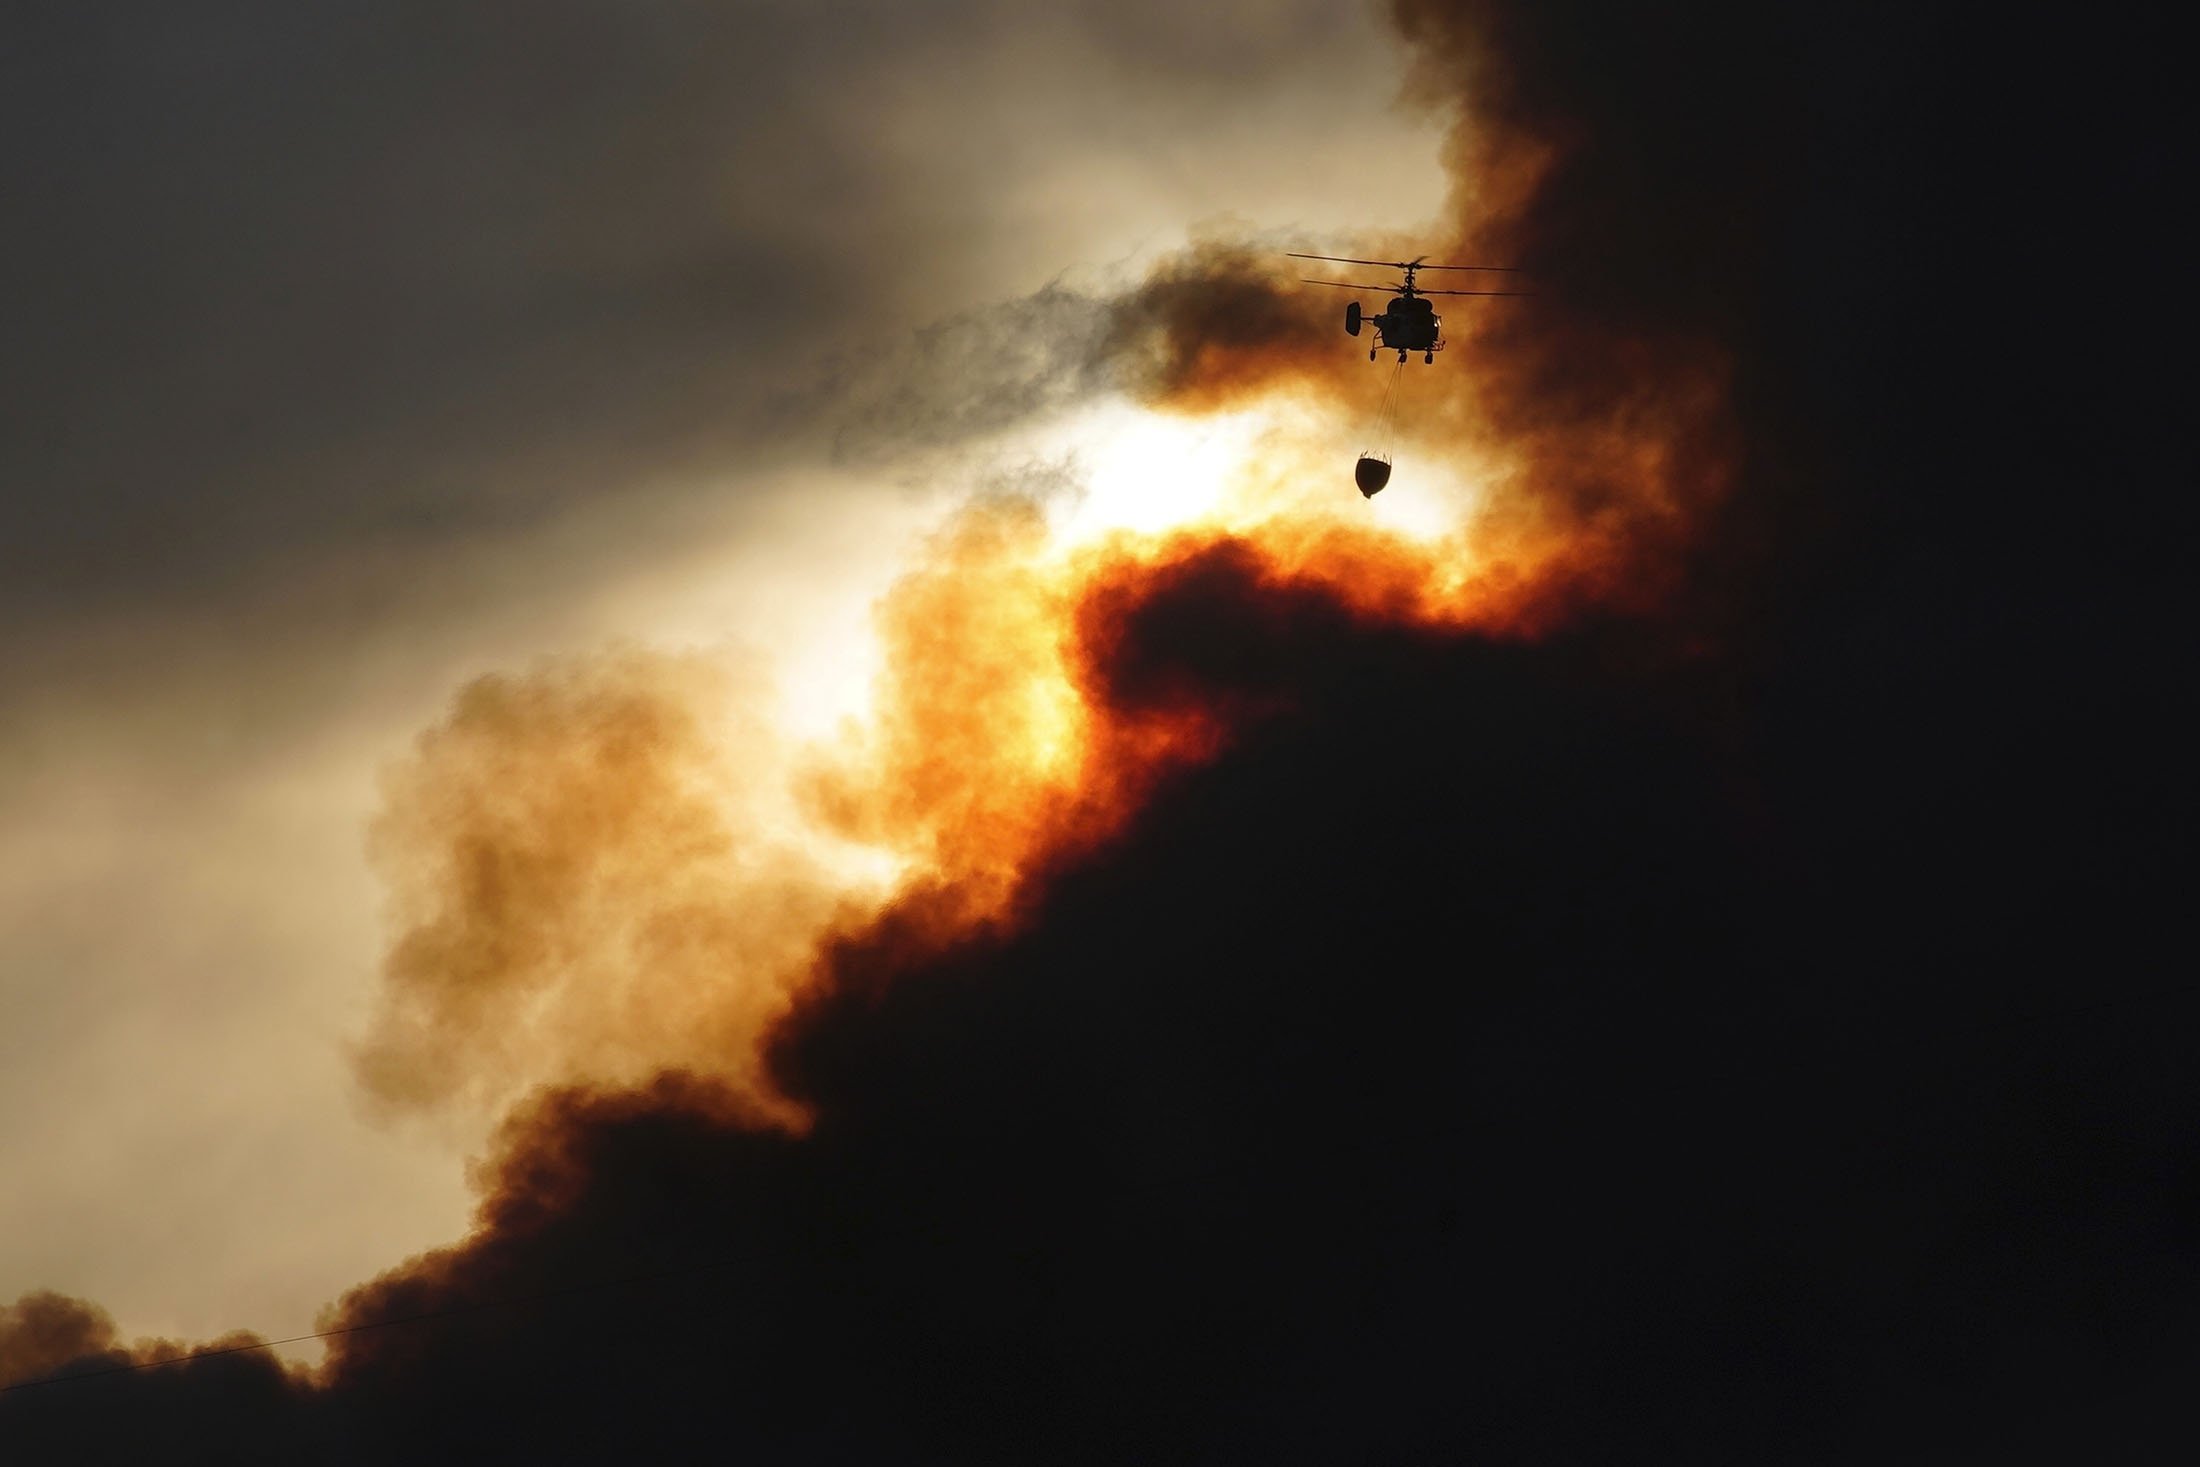 A firefighting helicopter carries water to drop on a wildfire in Santa Coloma de Queralt, near Tarragona, Spain, July 25, 2021. (AP Photo)